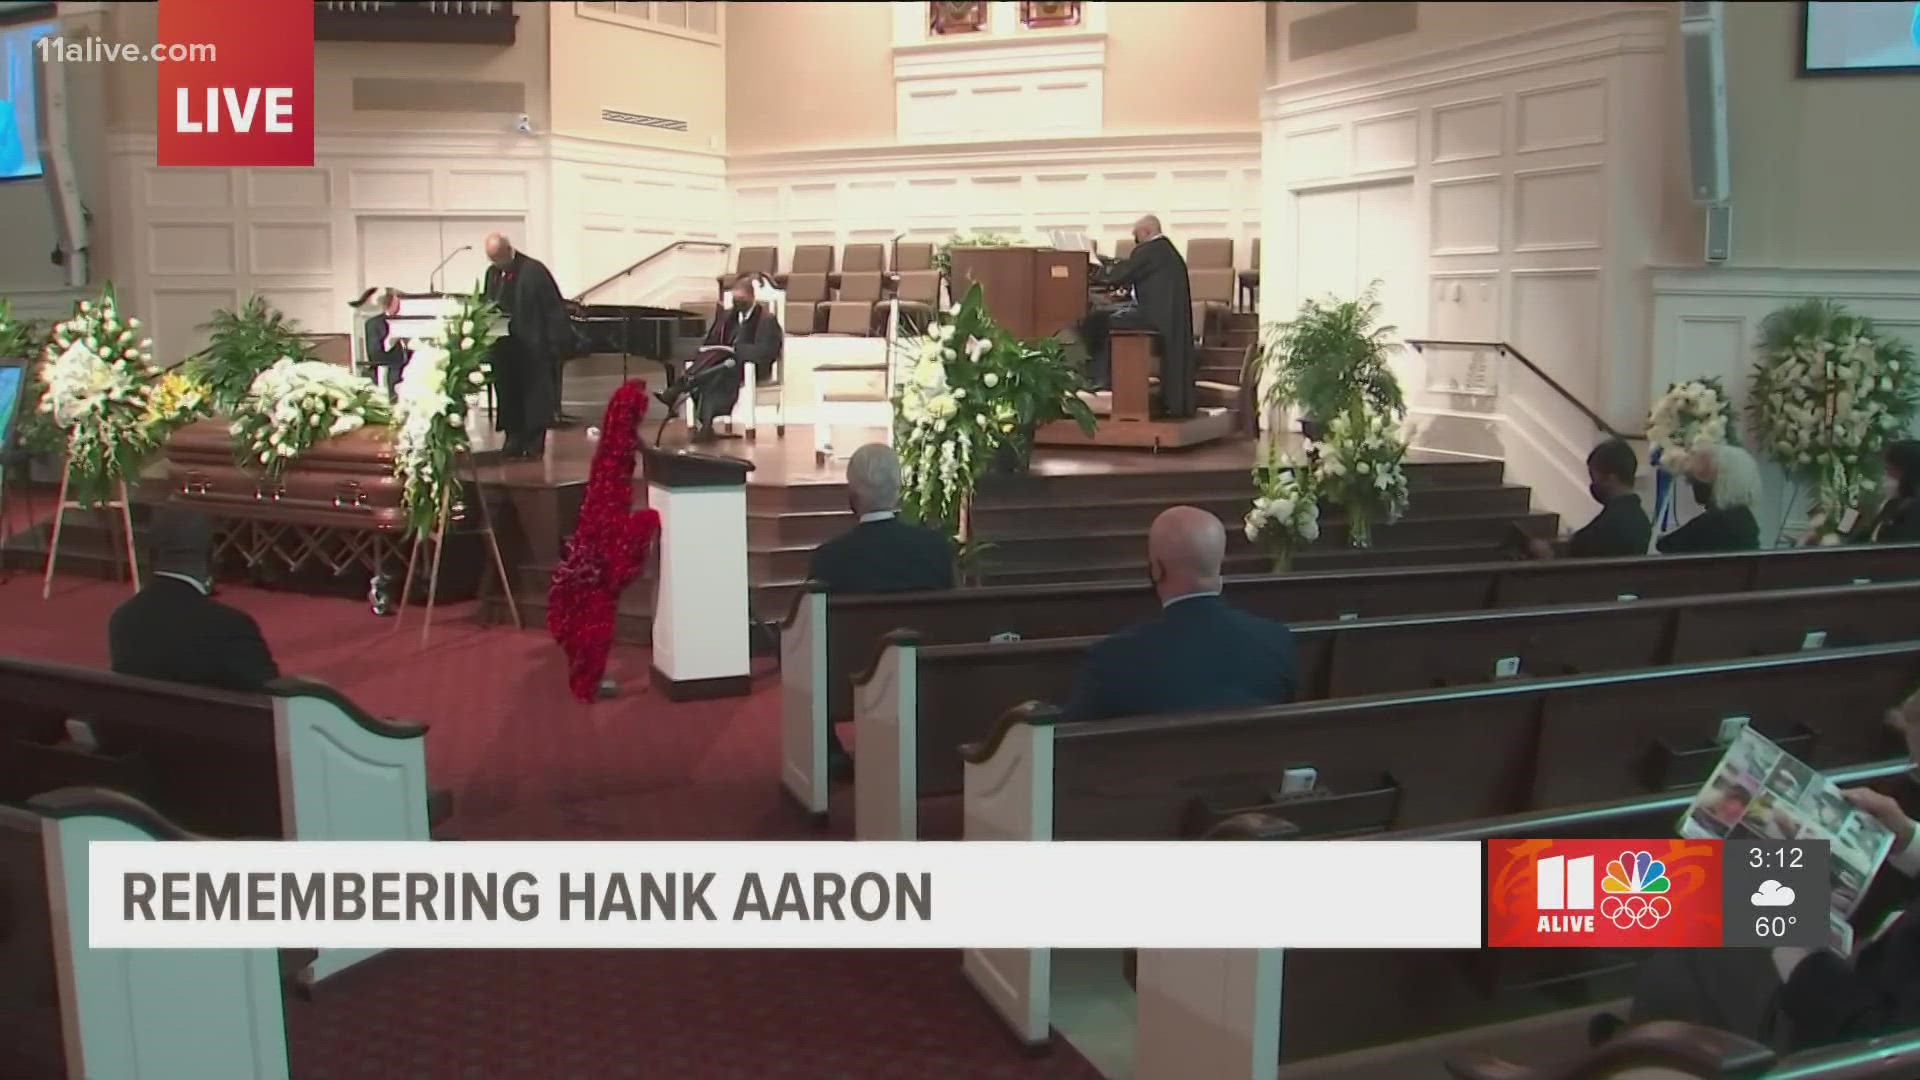 The eulogy is delivered at the funeral of Henry Louis Aaron at Friendship Baptist Church.